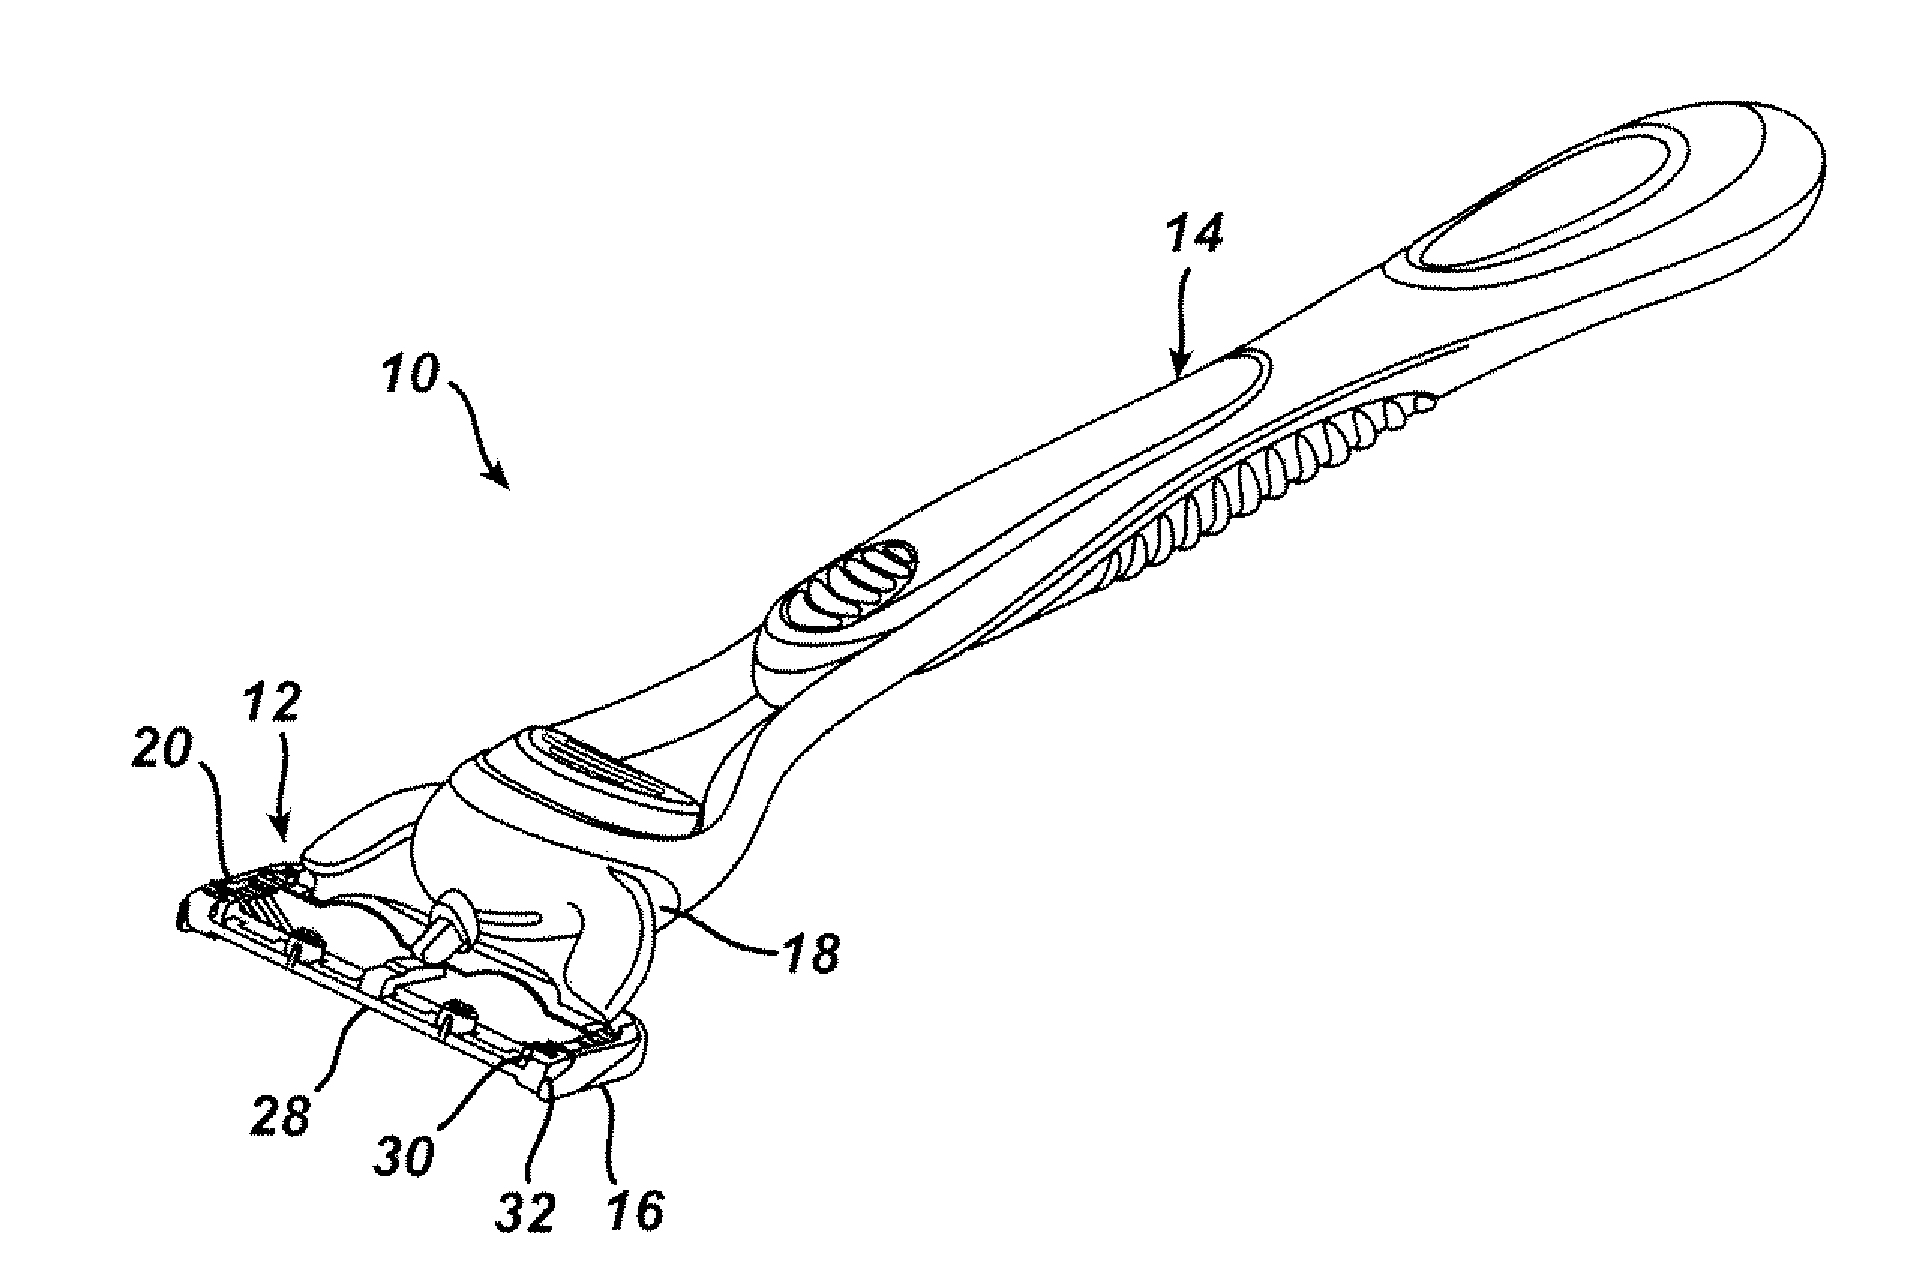 Shaving Razors and Other Hair Cutting Assemblies